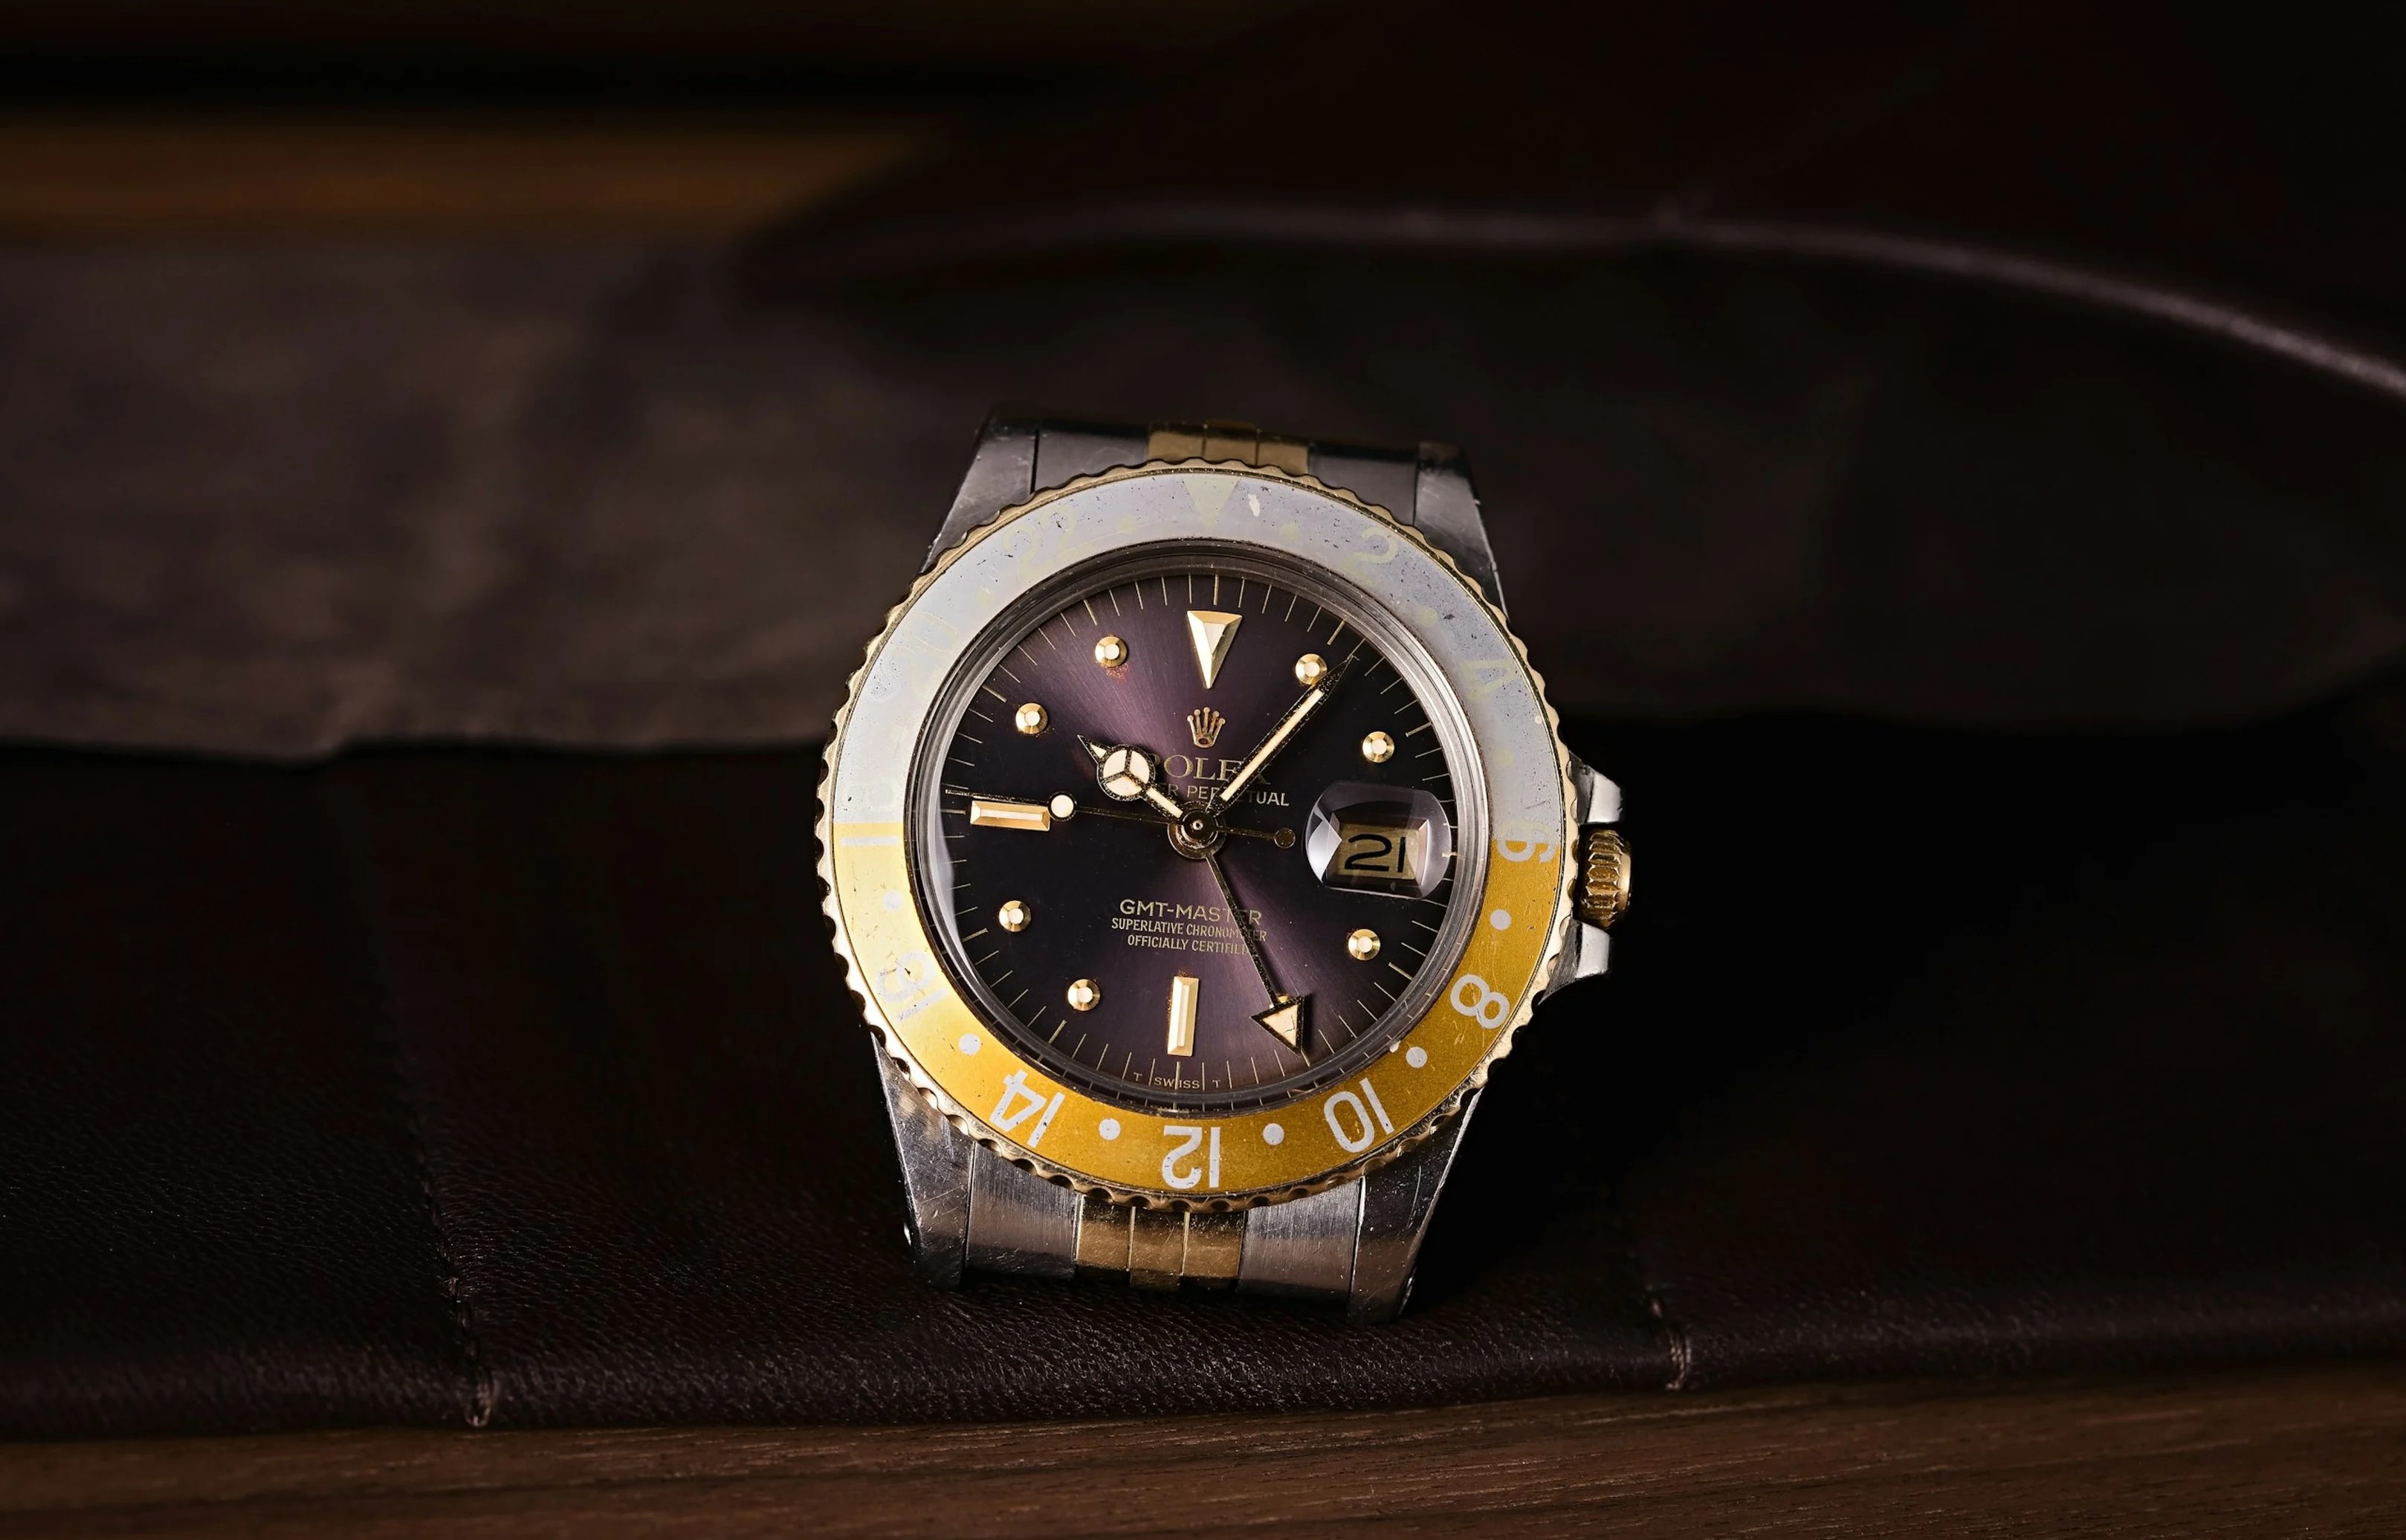 A front view of the Rolex GMT Master Root Beer watch.